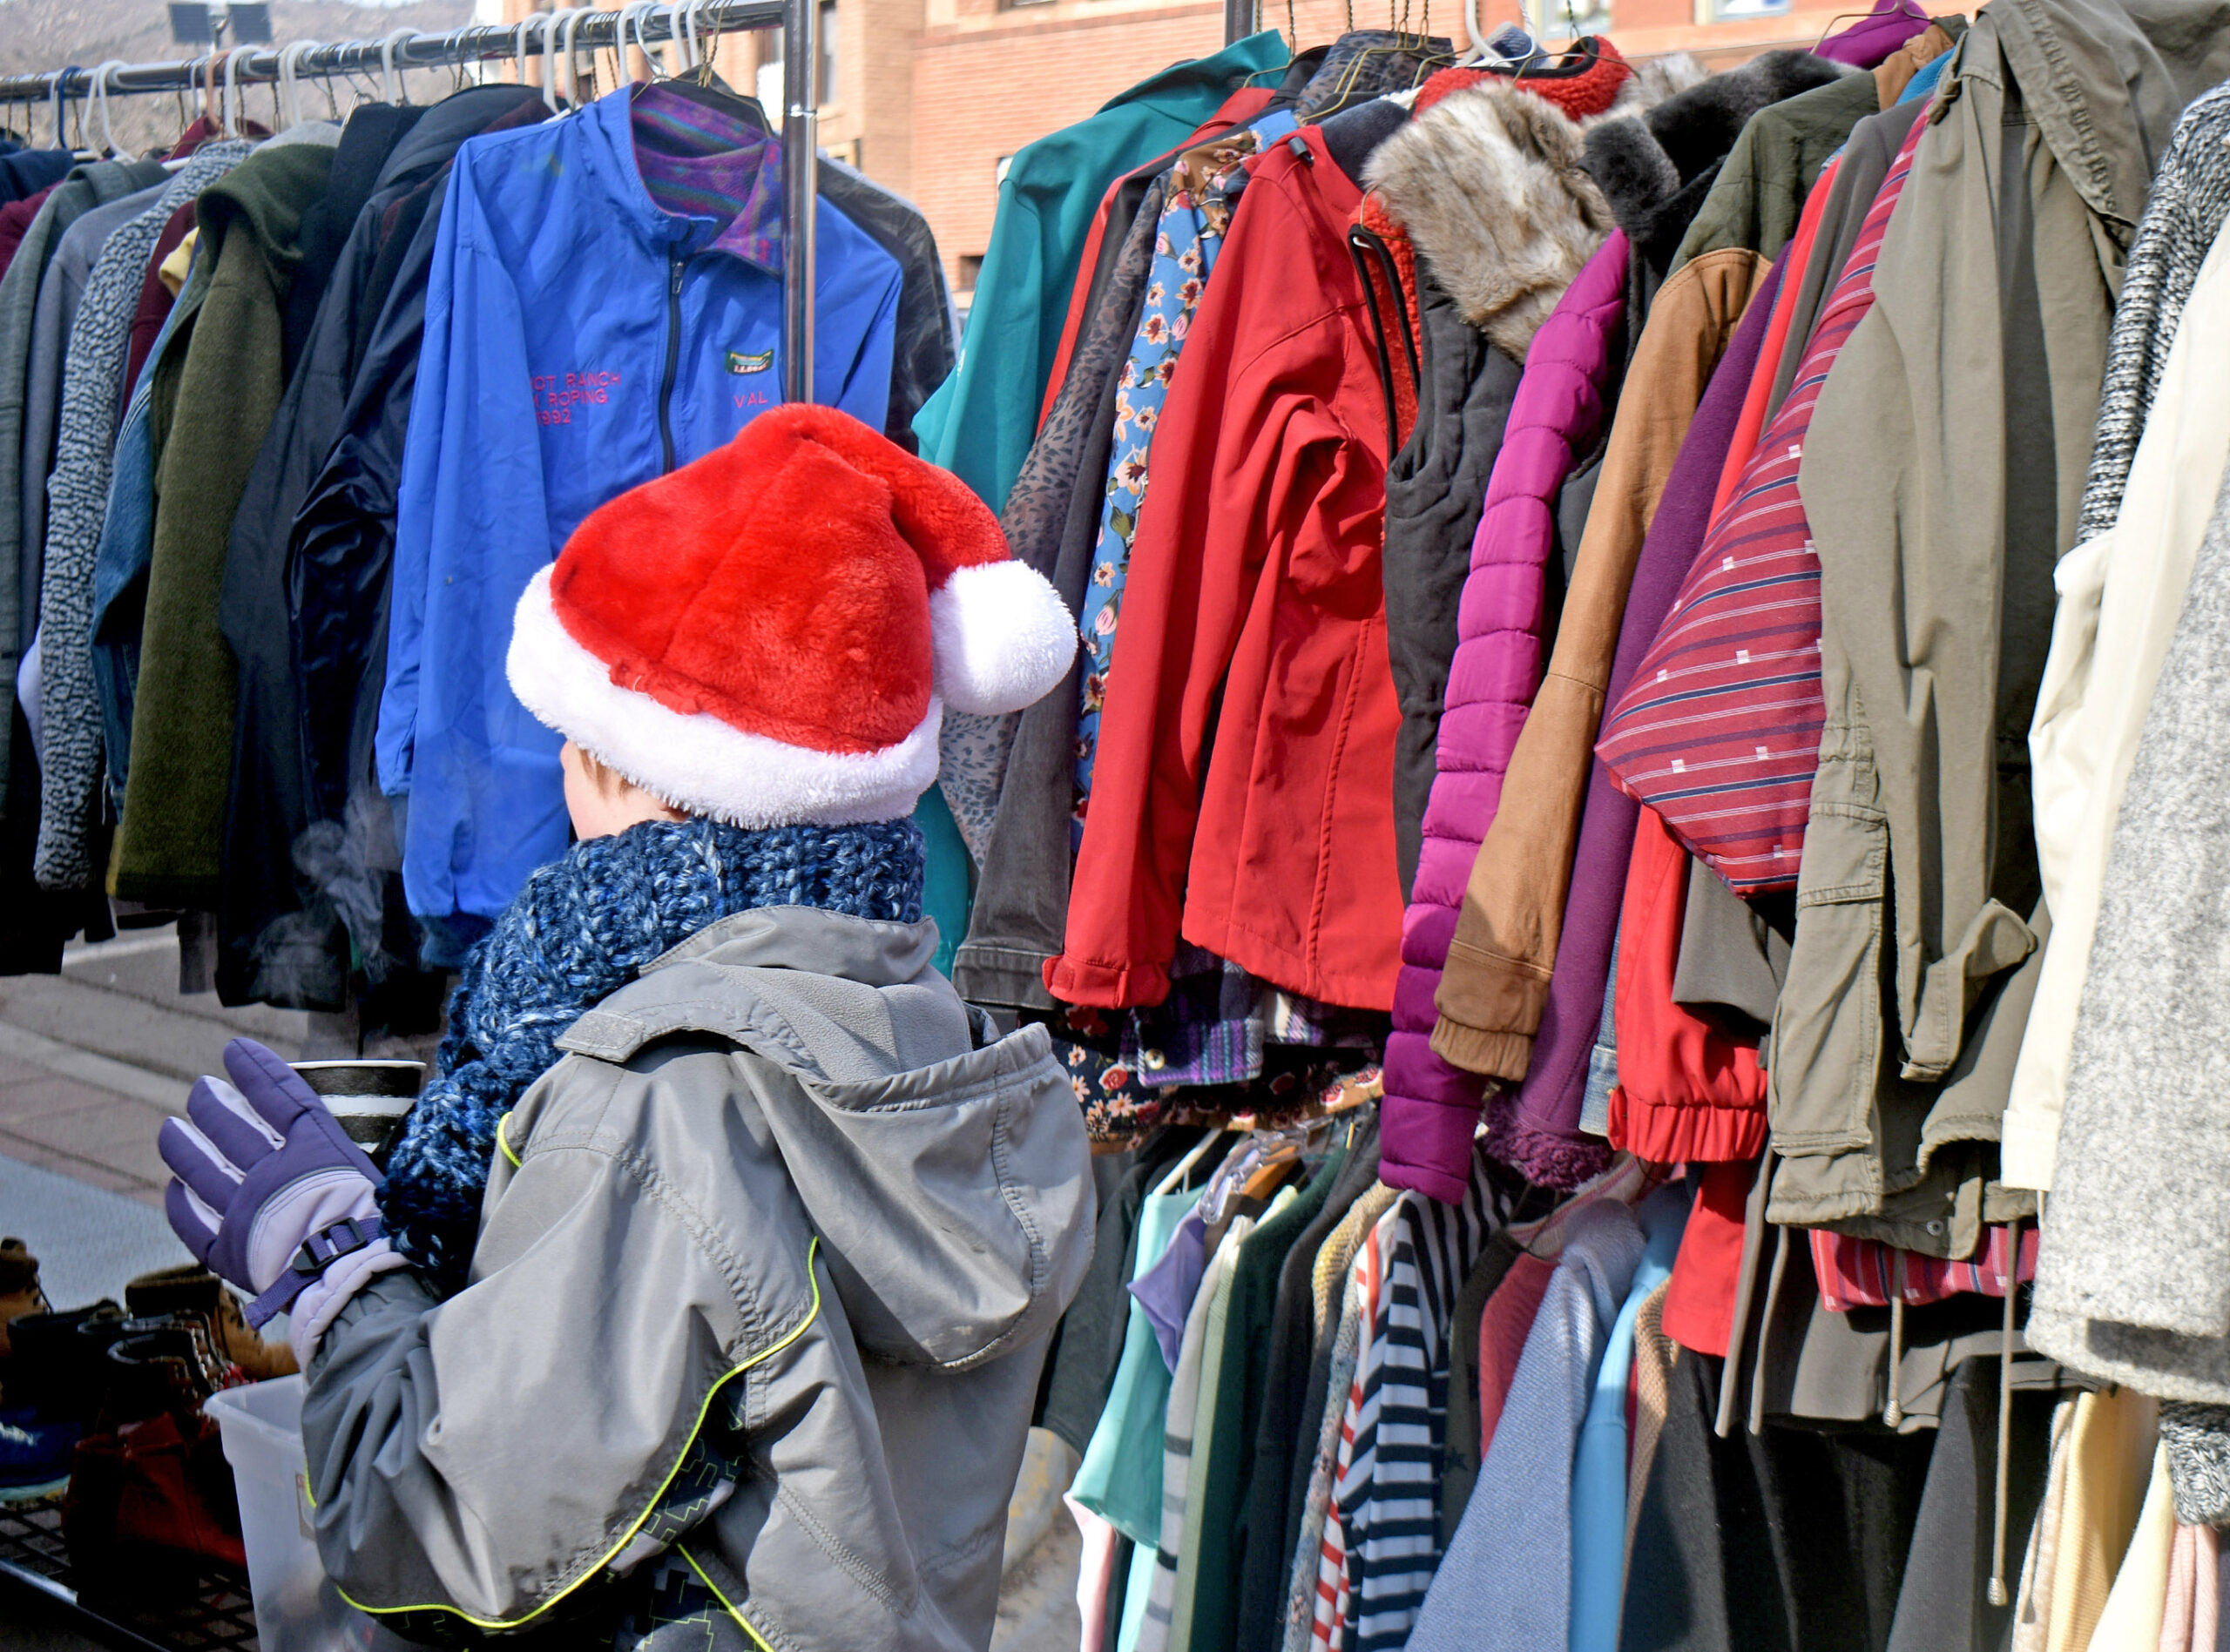 Photo by Rhonda Van Pelt. An elf helps out at Manitou Springs Real Estate’s warm clothing giveaway on Saturday, Dec. 3. The community was very generous this year; most of the unclaimed items were donated to Westside CARES.